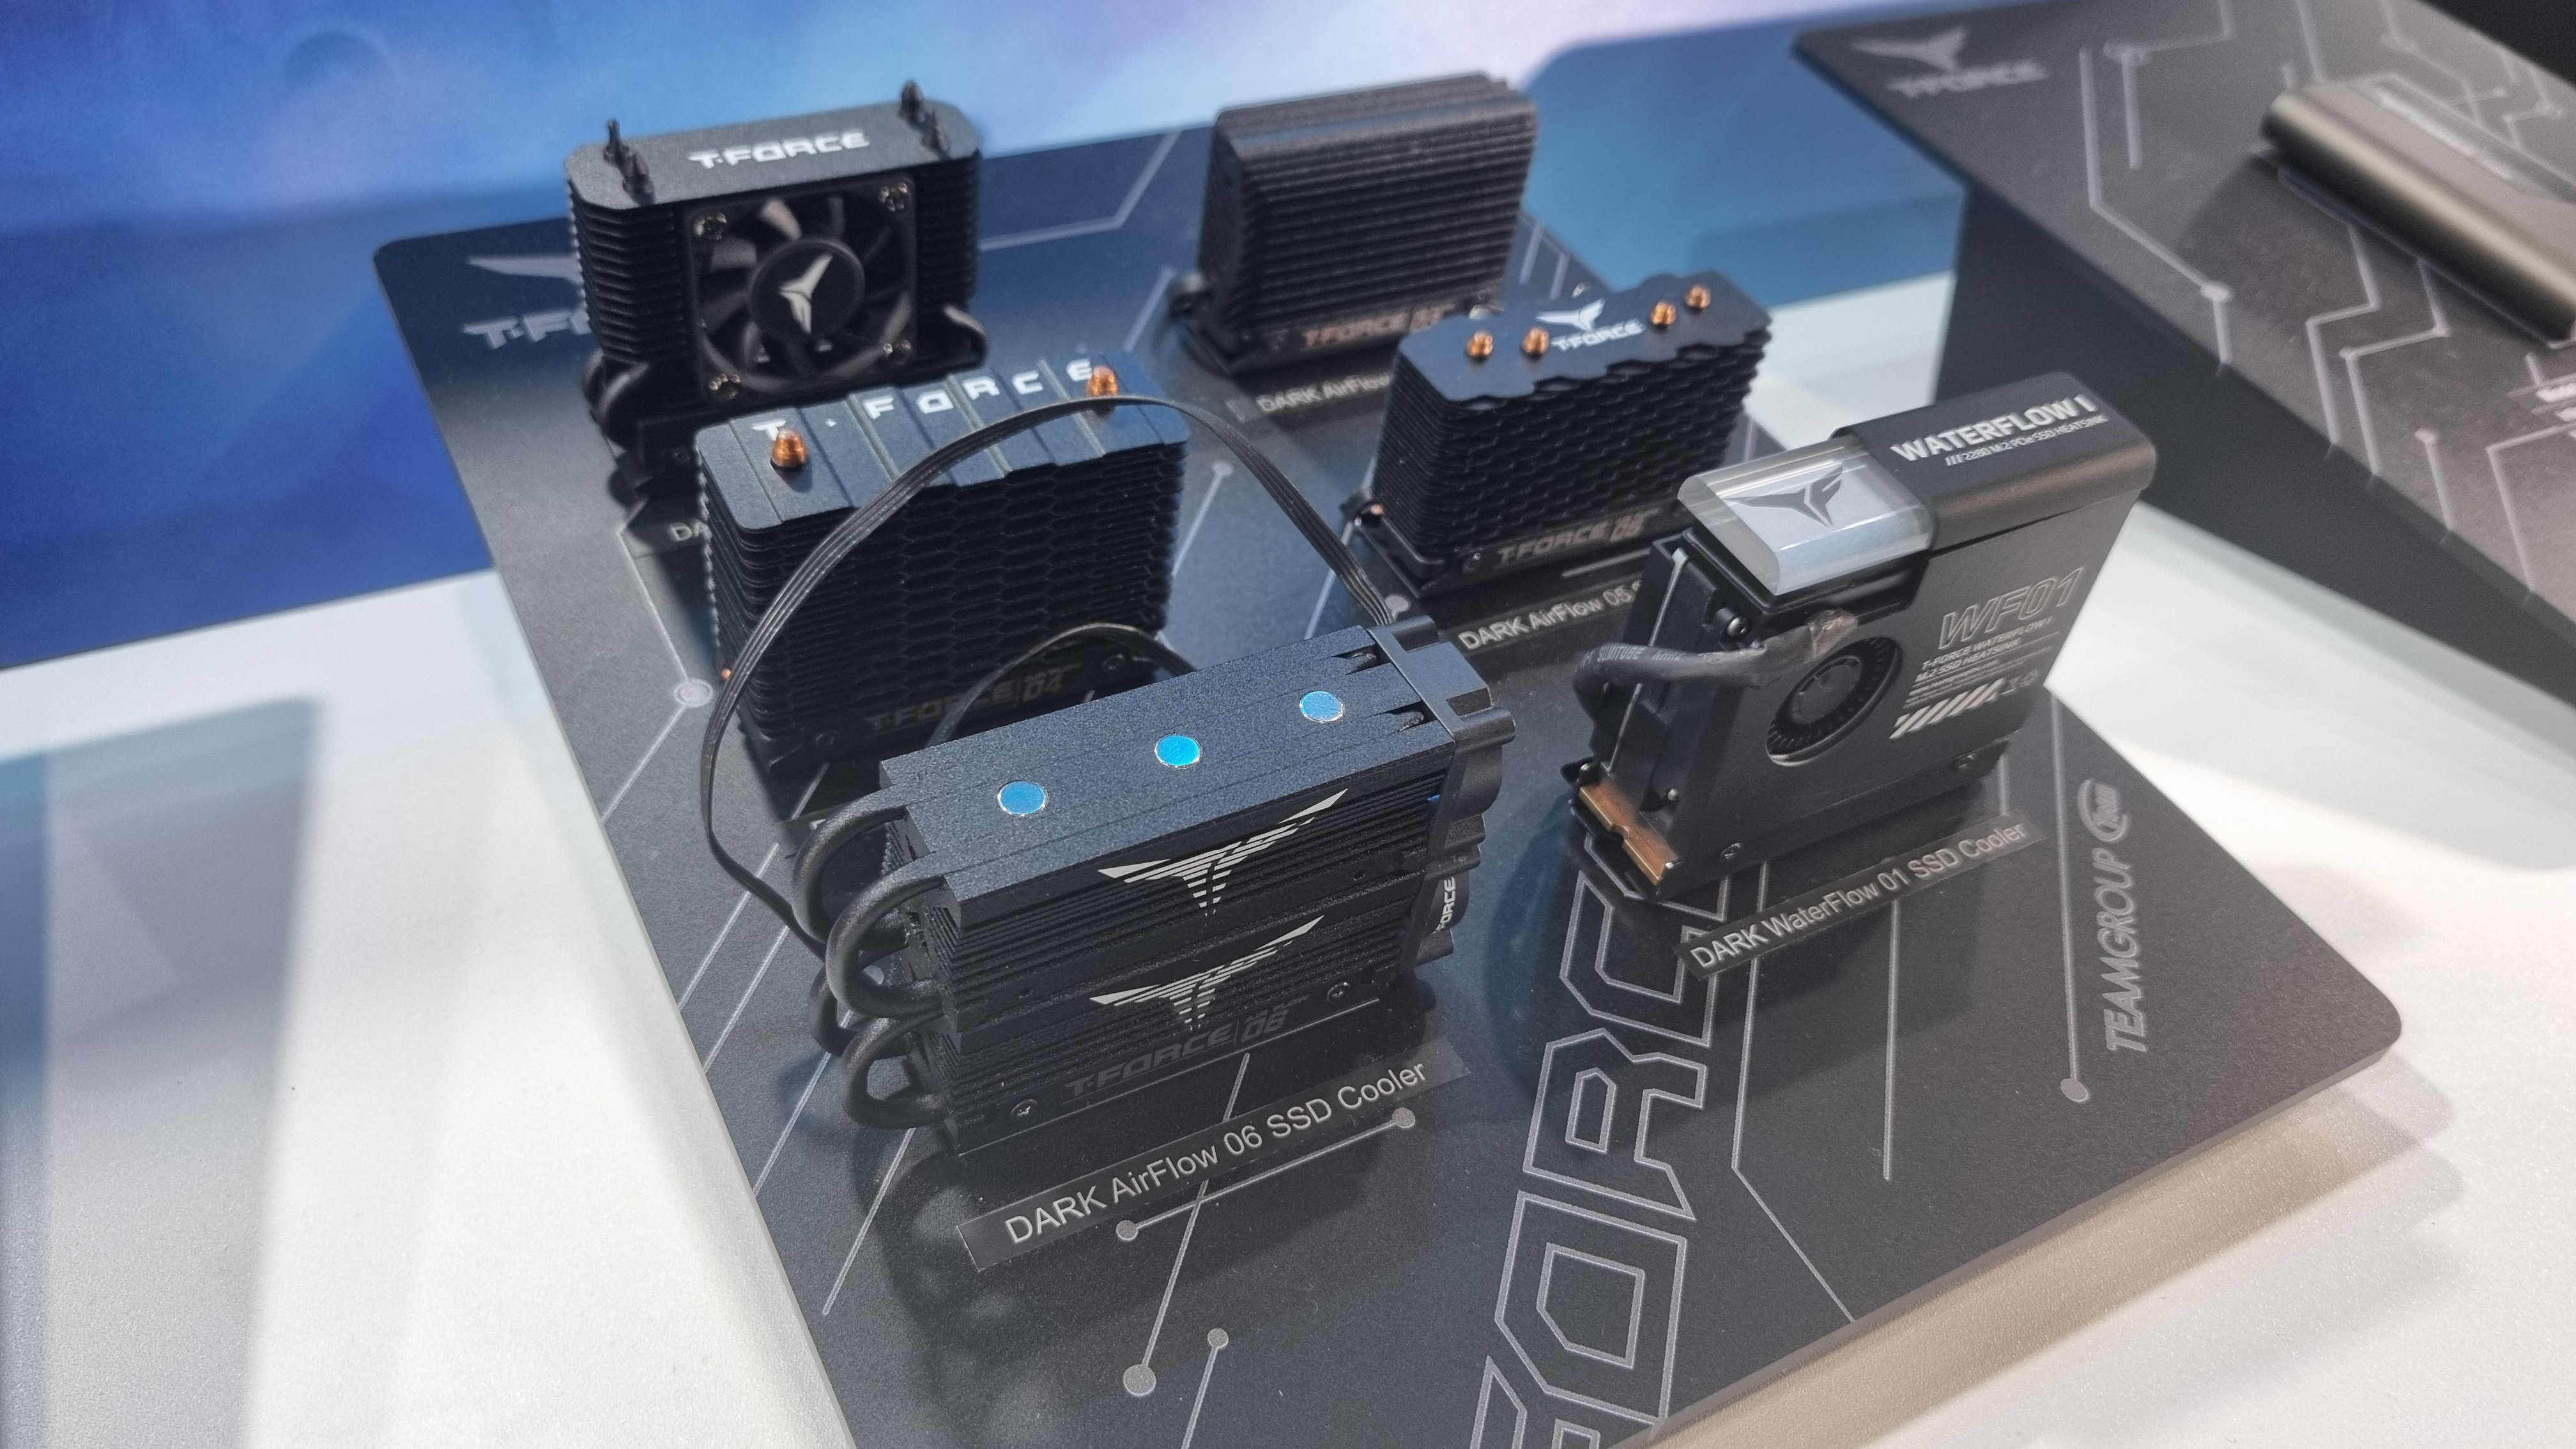 Some prototype cooler designs for Gen 5 SSD drives at the Team Group booth at Computex